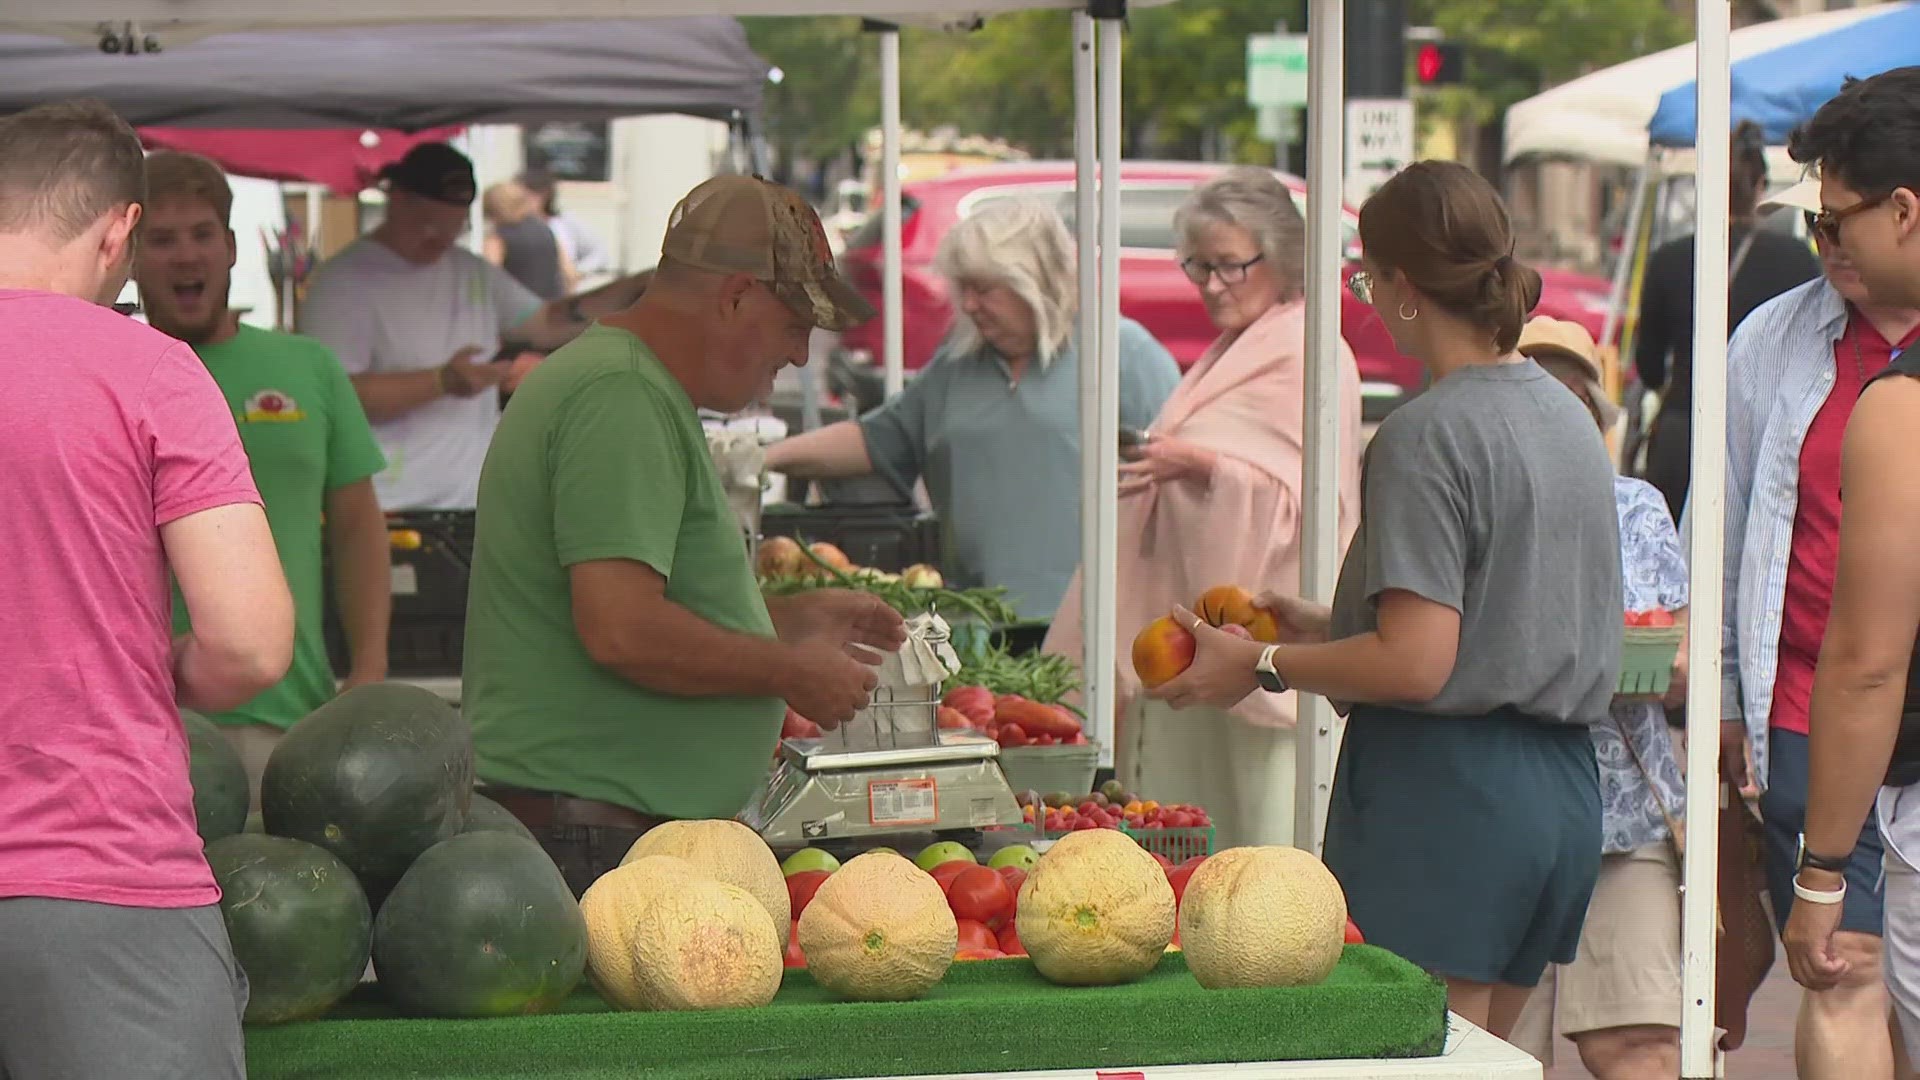 Dave Calabro takes us to City Market to tell some Good News!